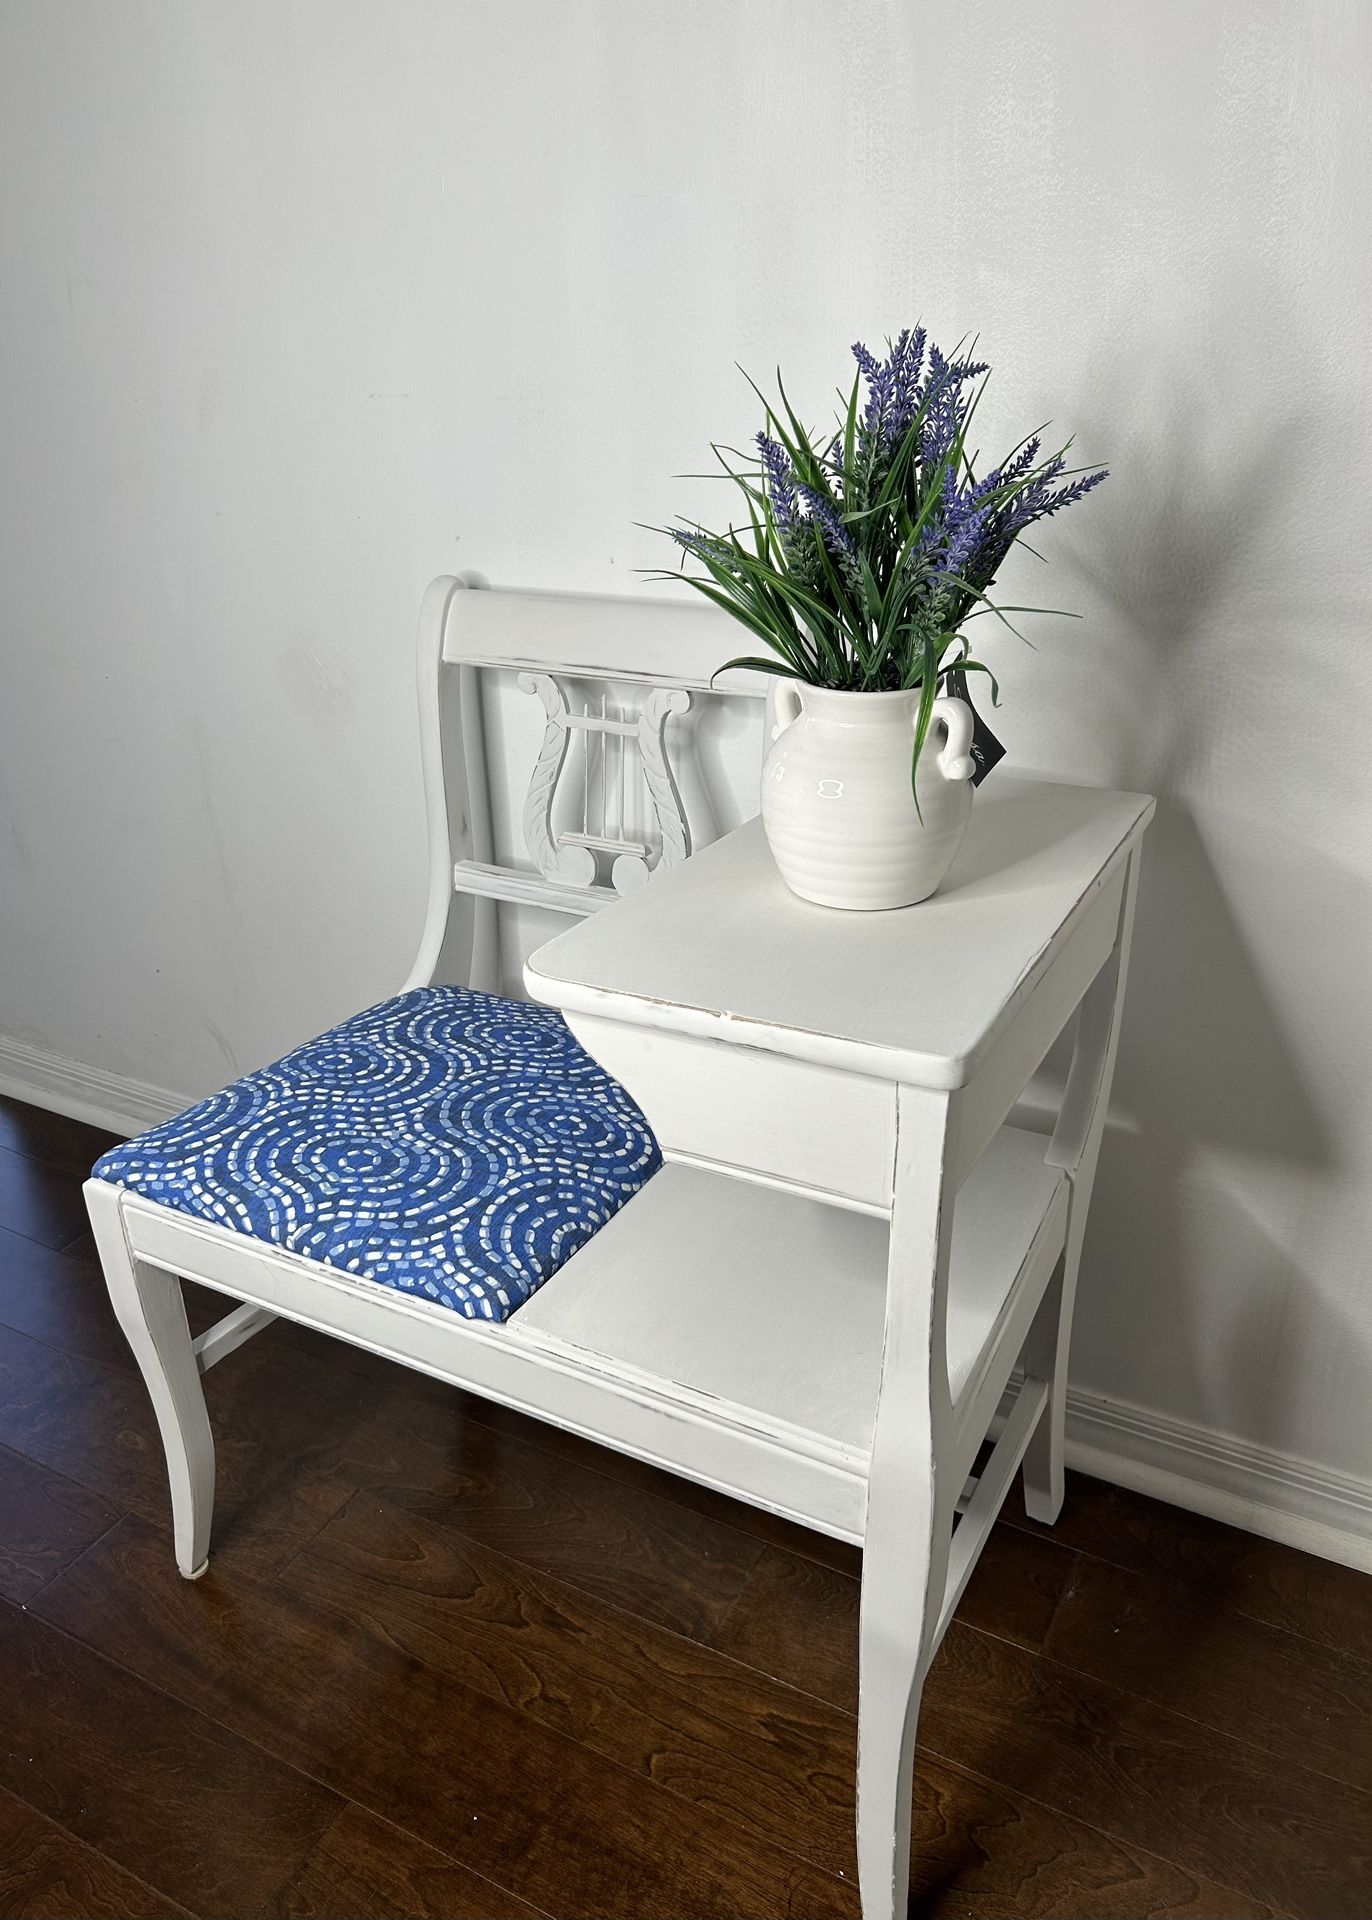 Stunning Blue And White Gossip Bench… New Fabric And Freshly Painted 